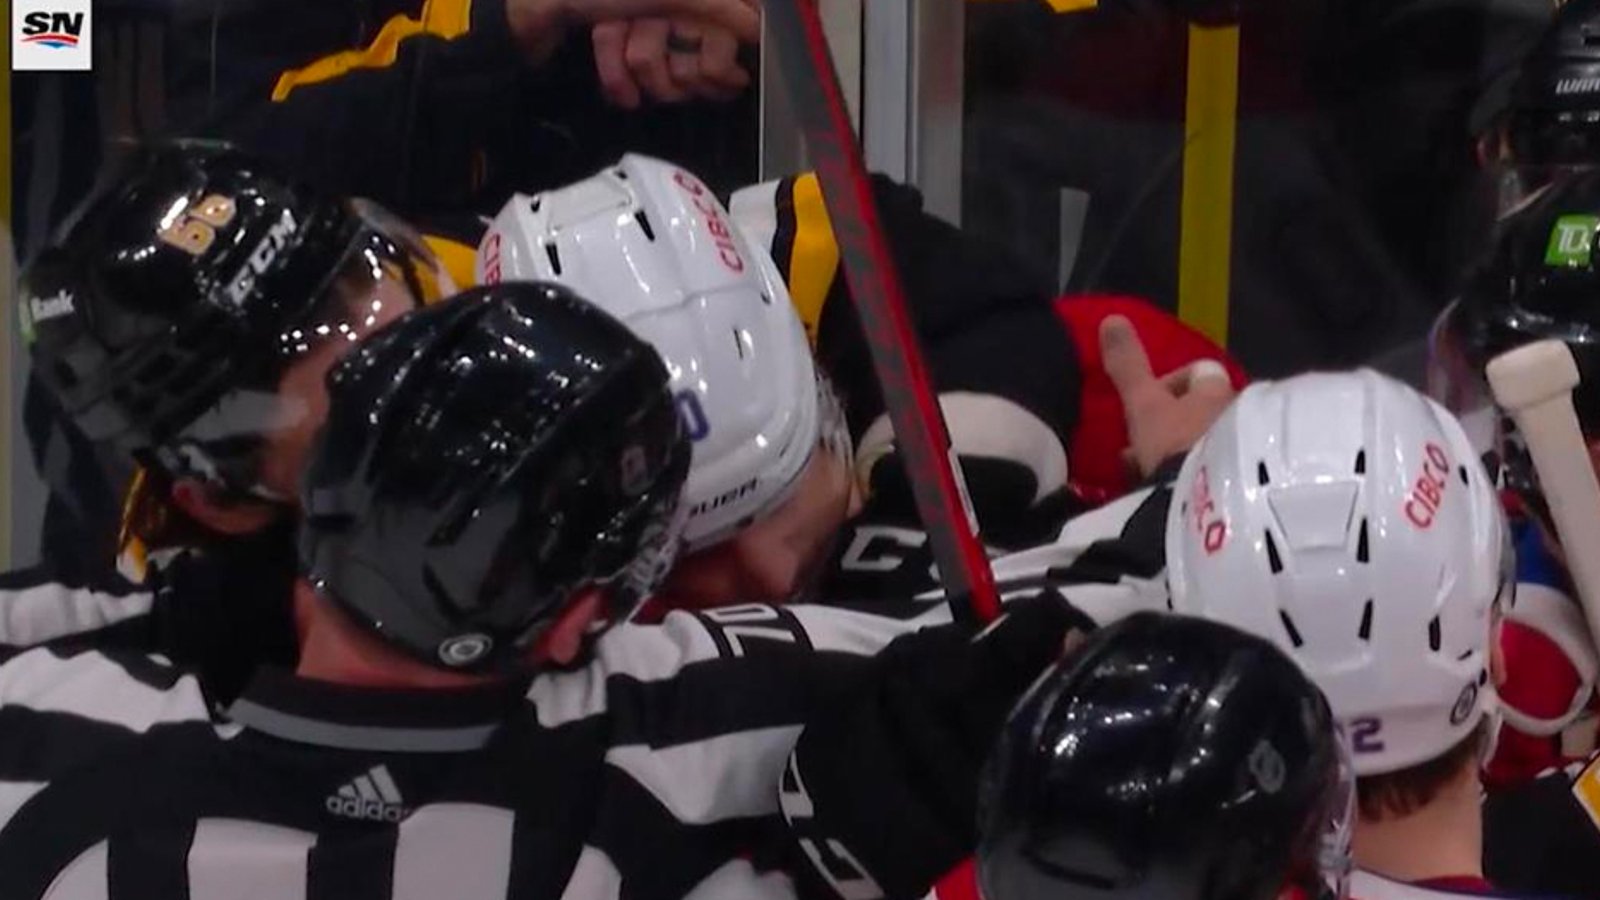 Chris Wideman suspended by NHL Player Safety